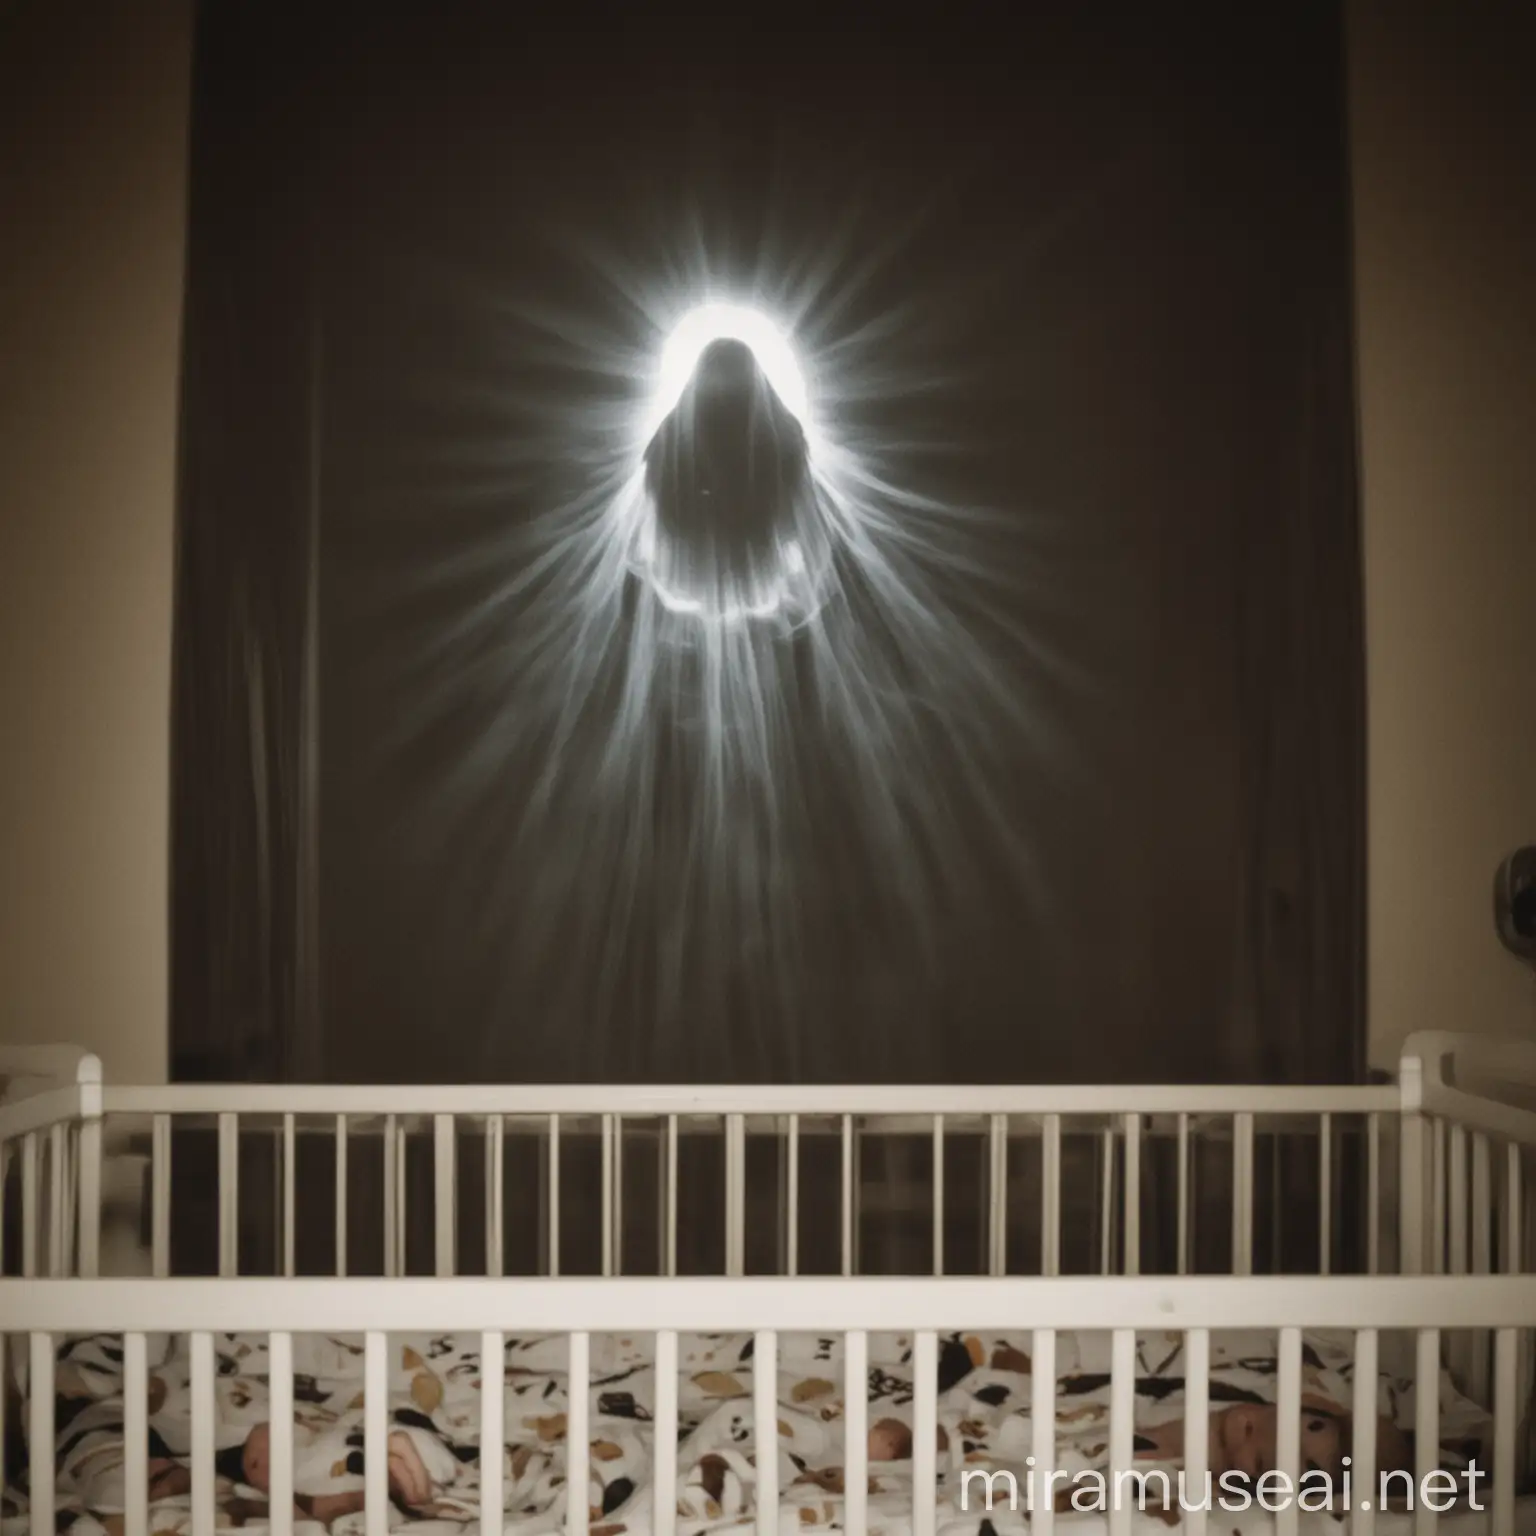 Creepy Ghostly Apparition Haunting Babys Cot in Monitor View